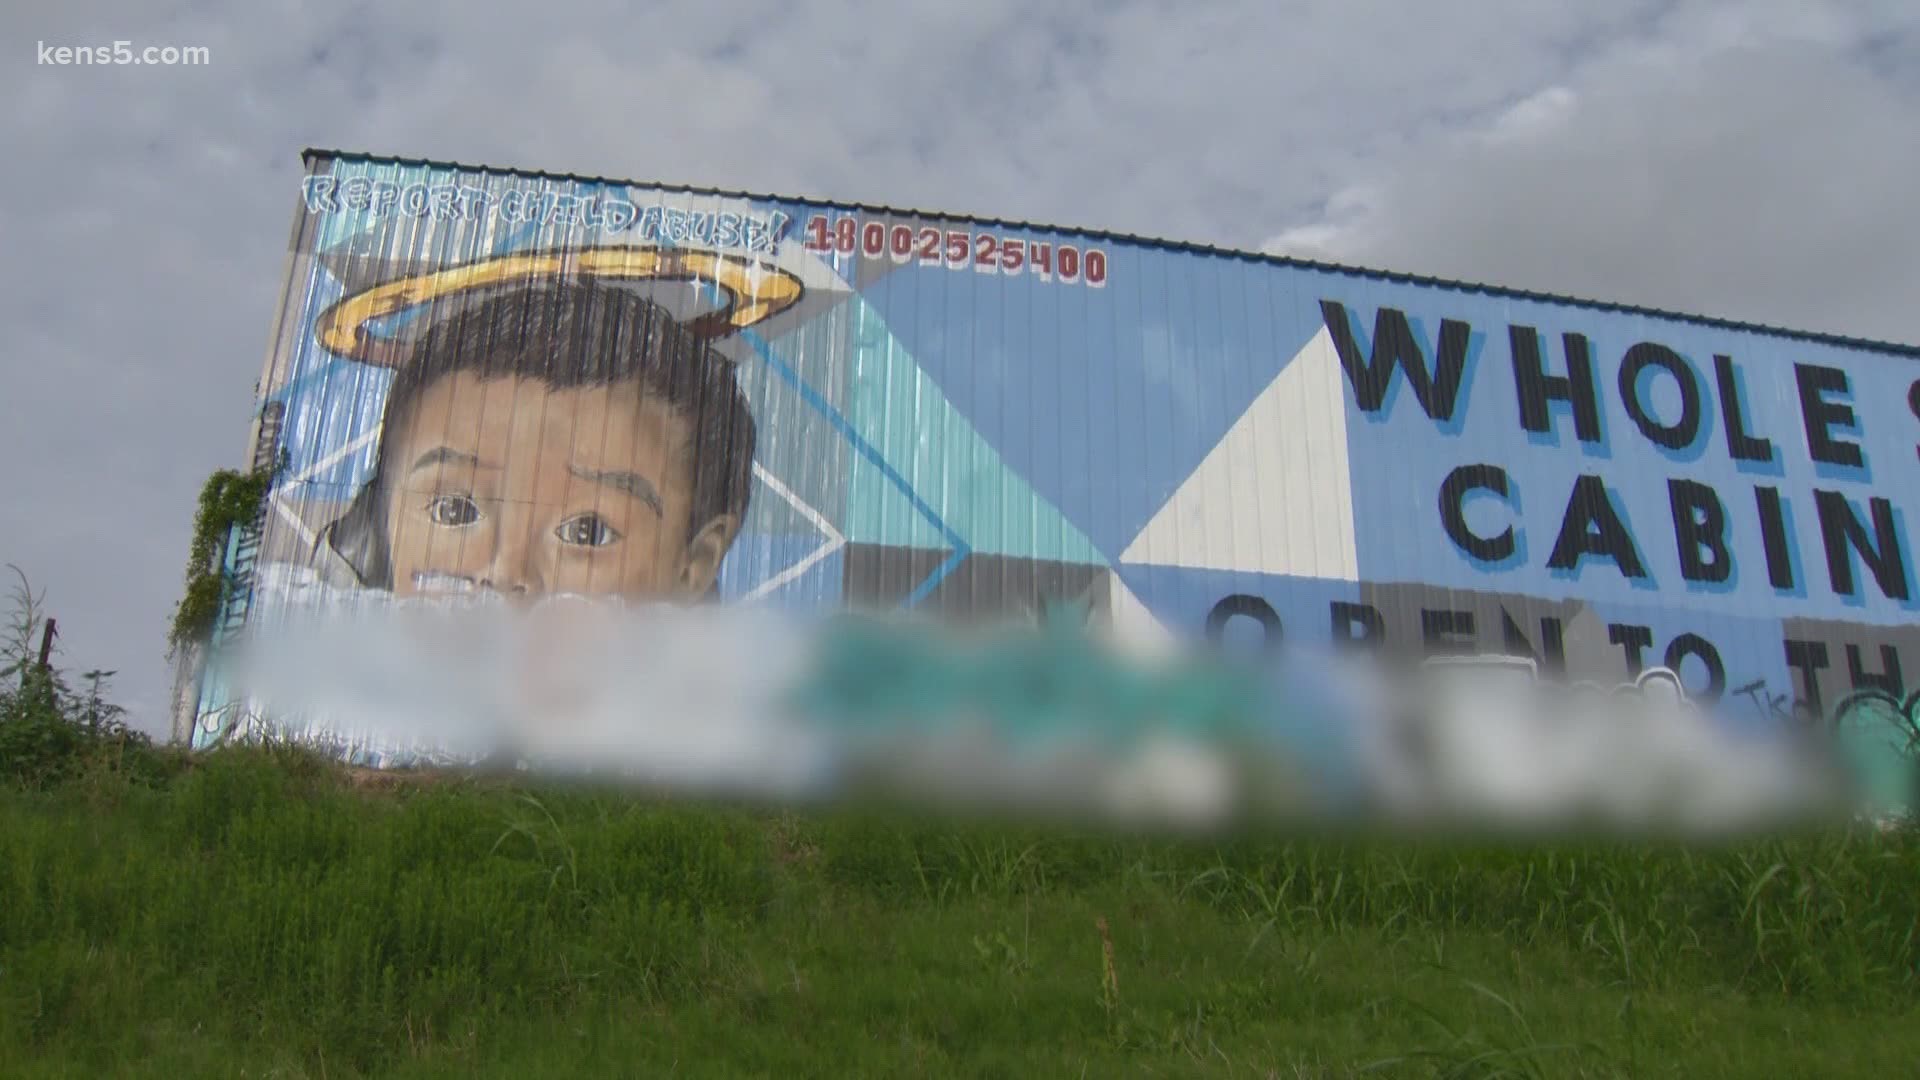 “We put a mural up to represent him with the child abuse hotline number so we can save lives, and someone comes and defaces it.” McGill said.